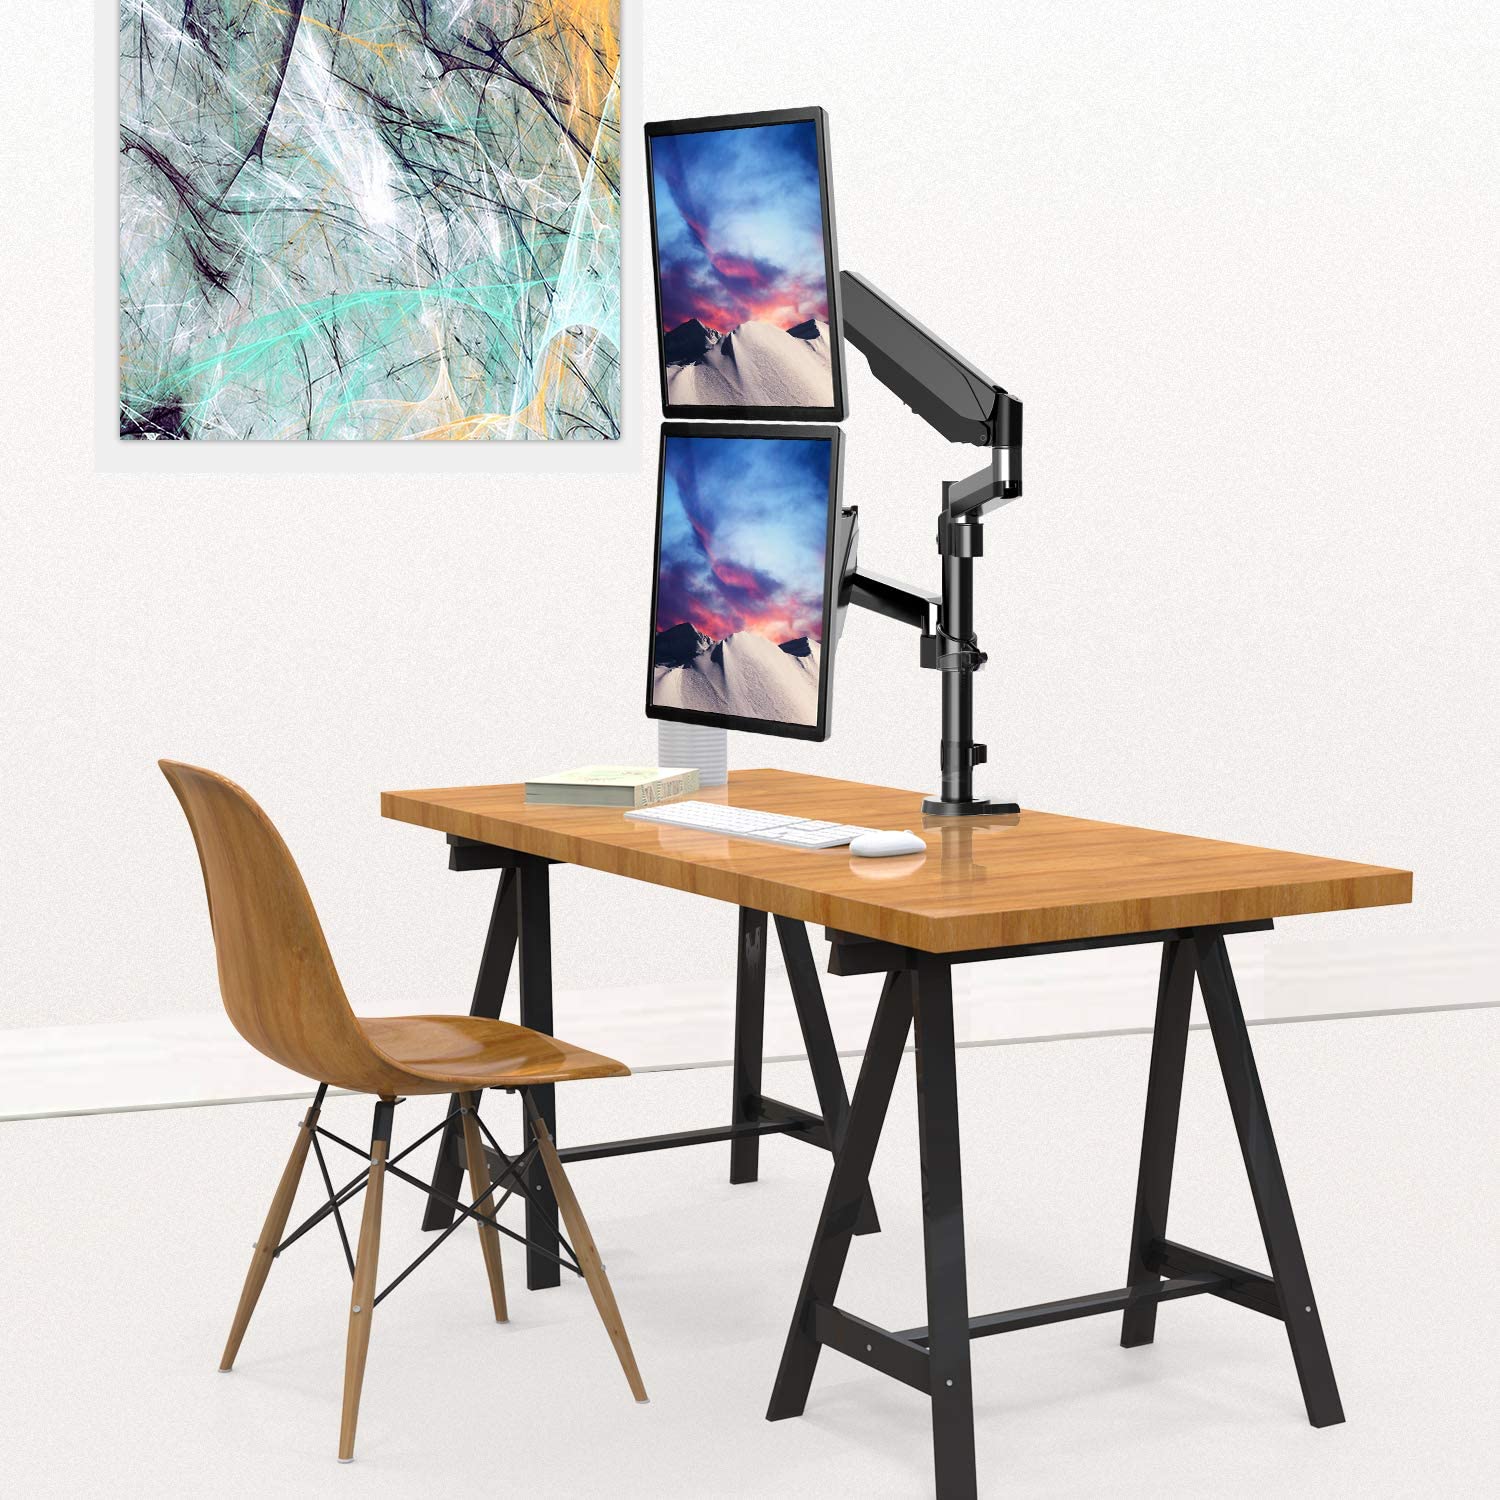 Dual Arms monitor arm places your monitors in portrait or lanscape orientation